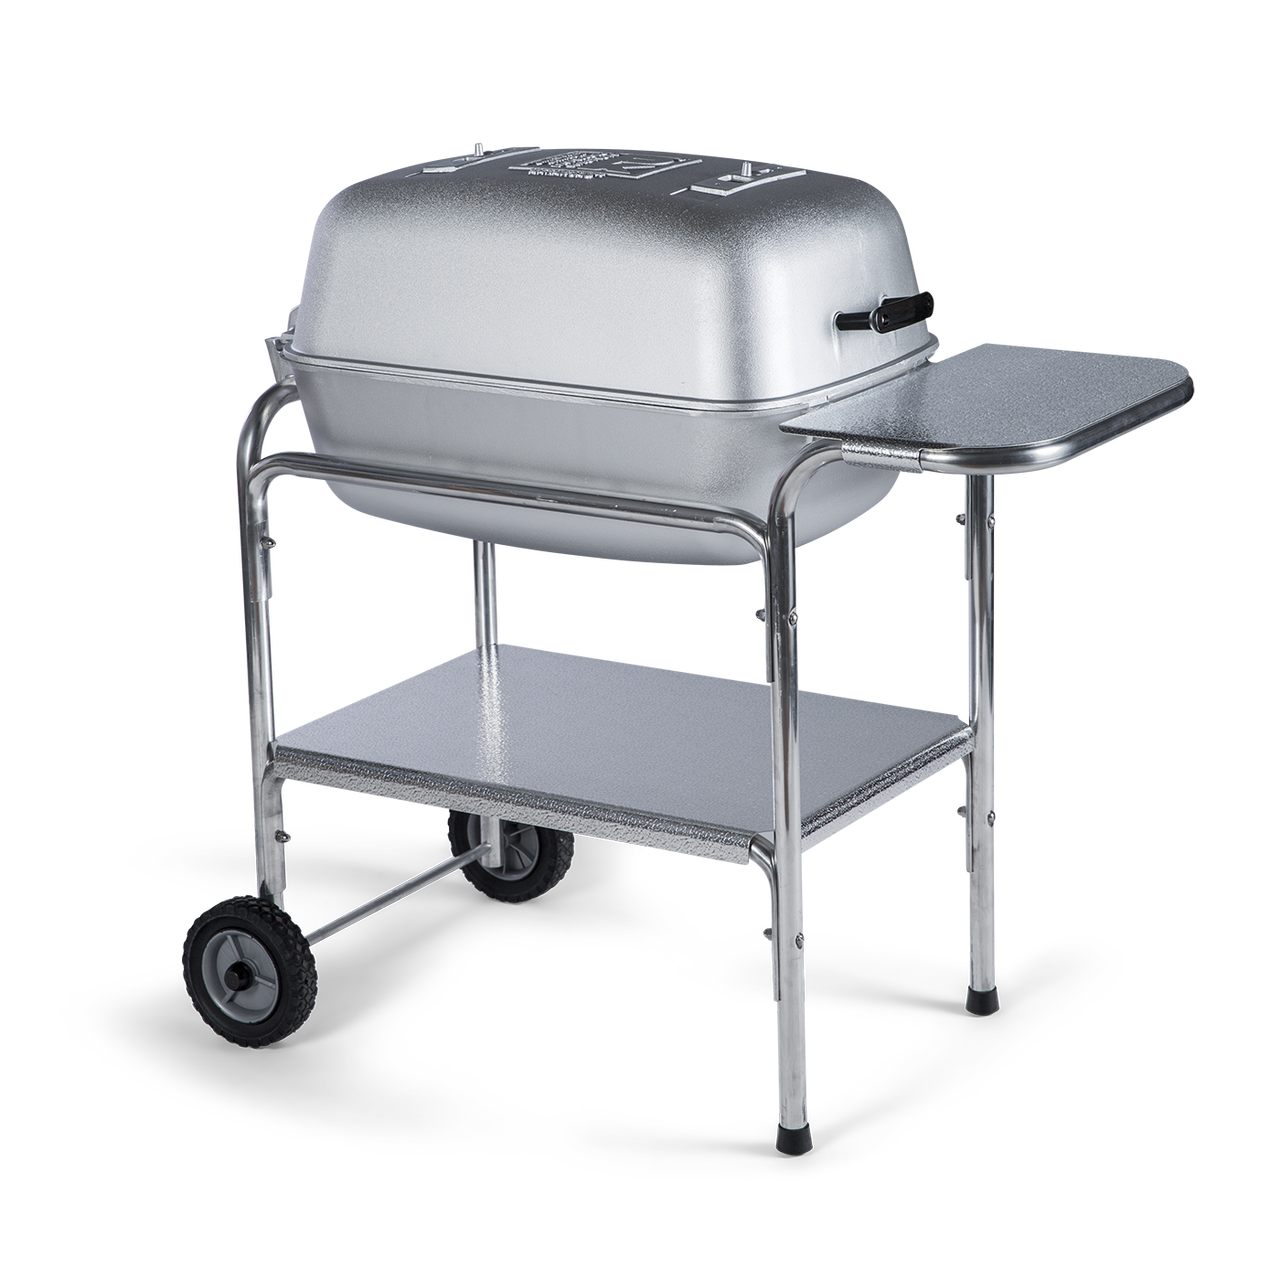 PK Grills the Original PK Grill and Smoker Silver Side View